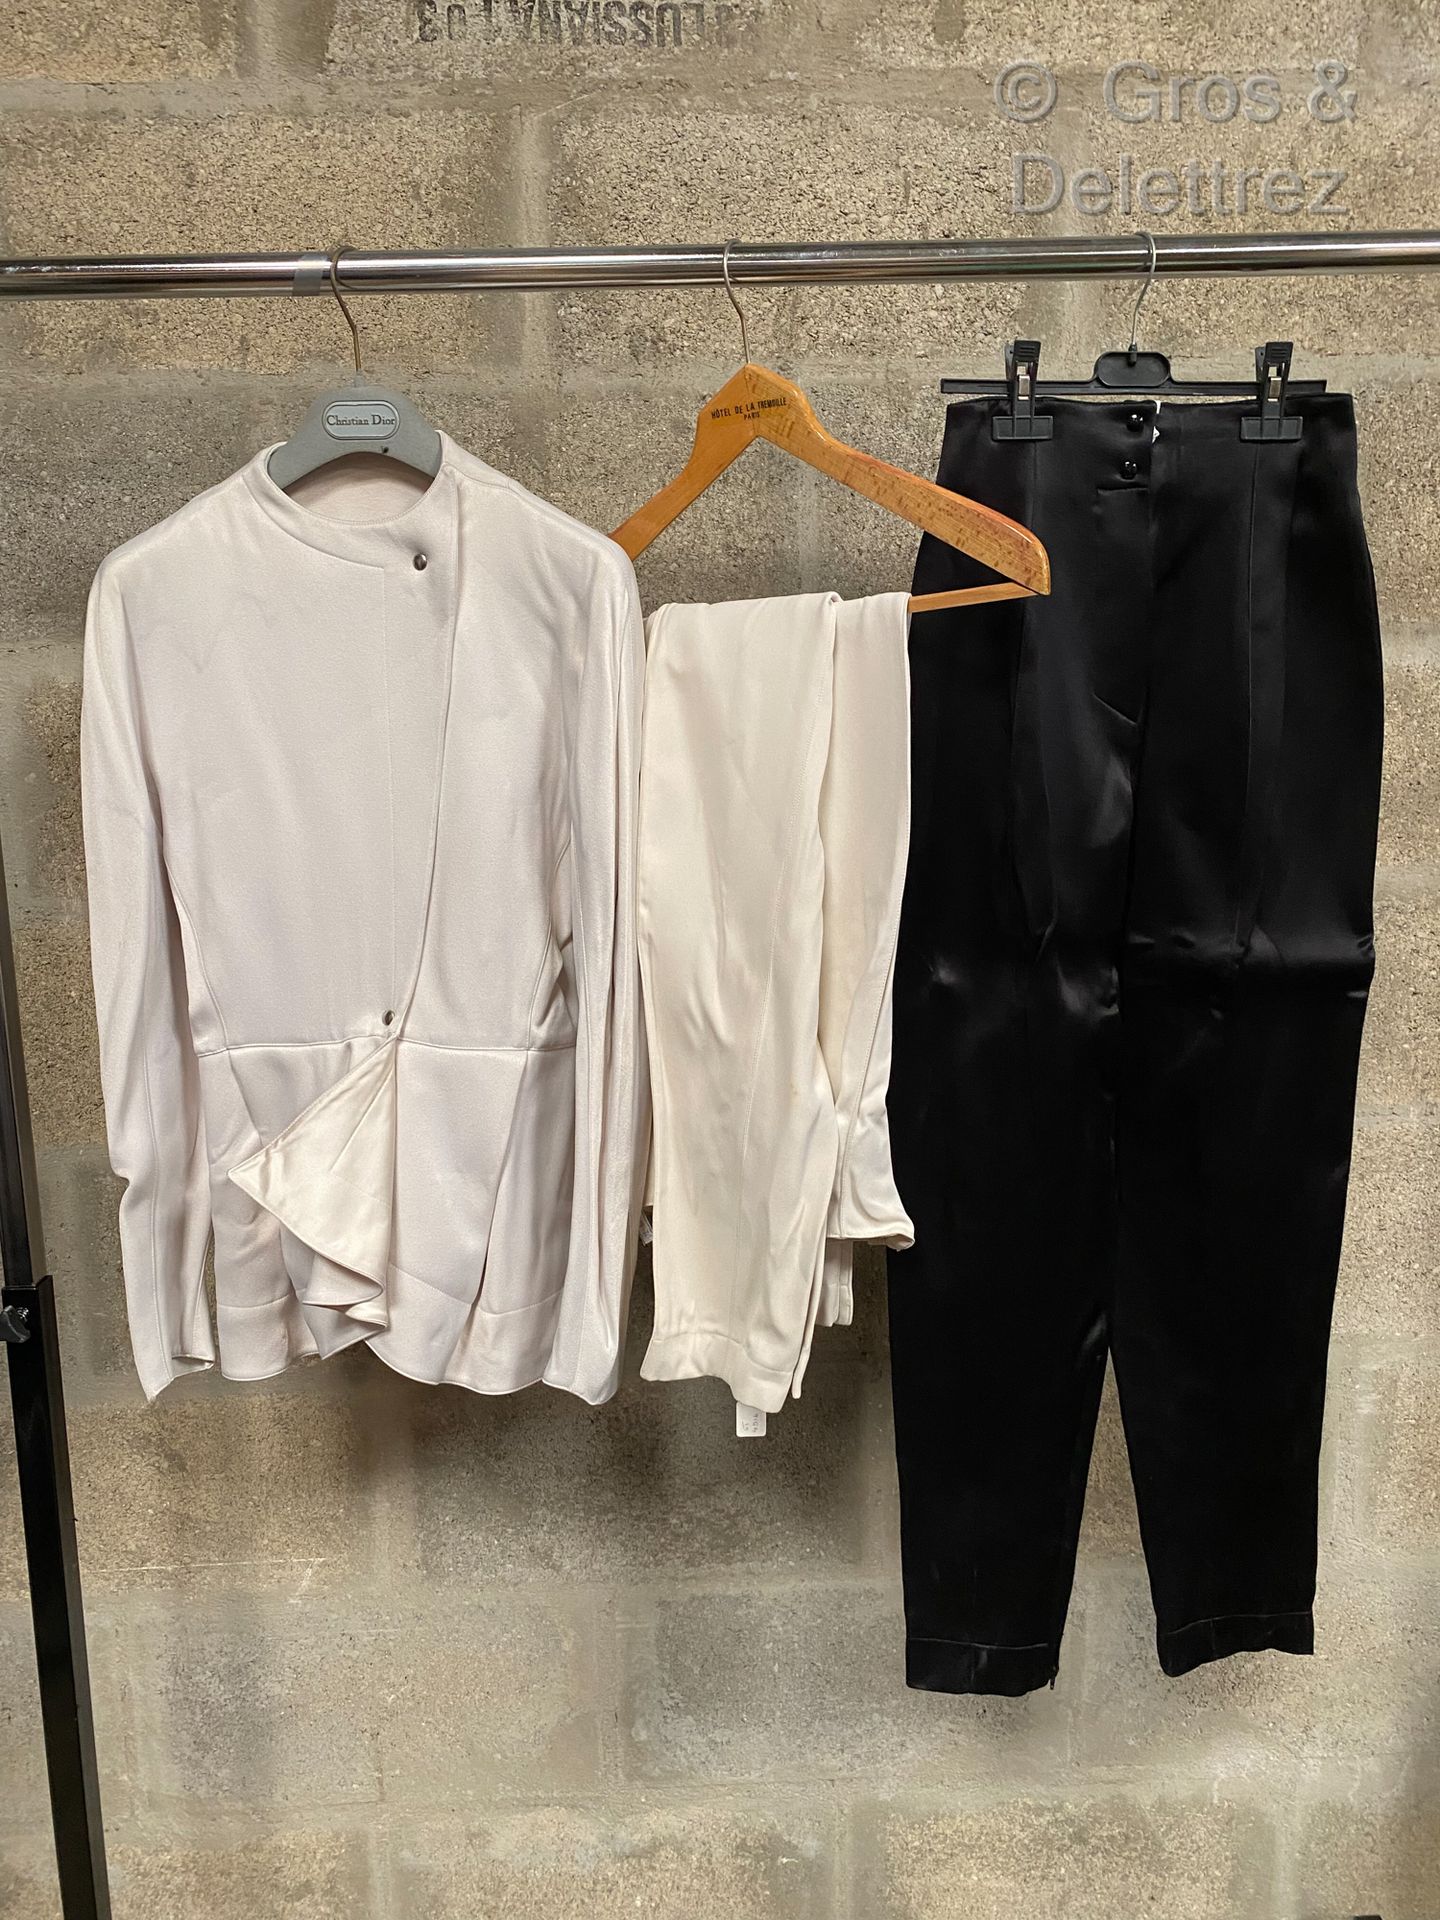 Null 
CLAUDE MONTANA

Lot composed of a jacket and two white trousers and a blac&hellip;